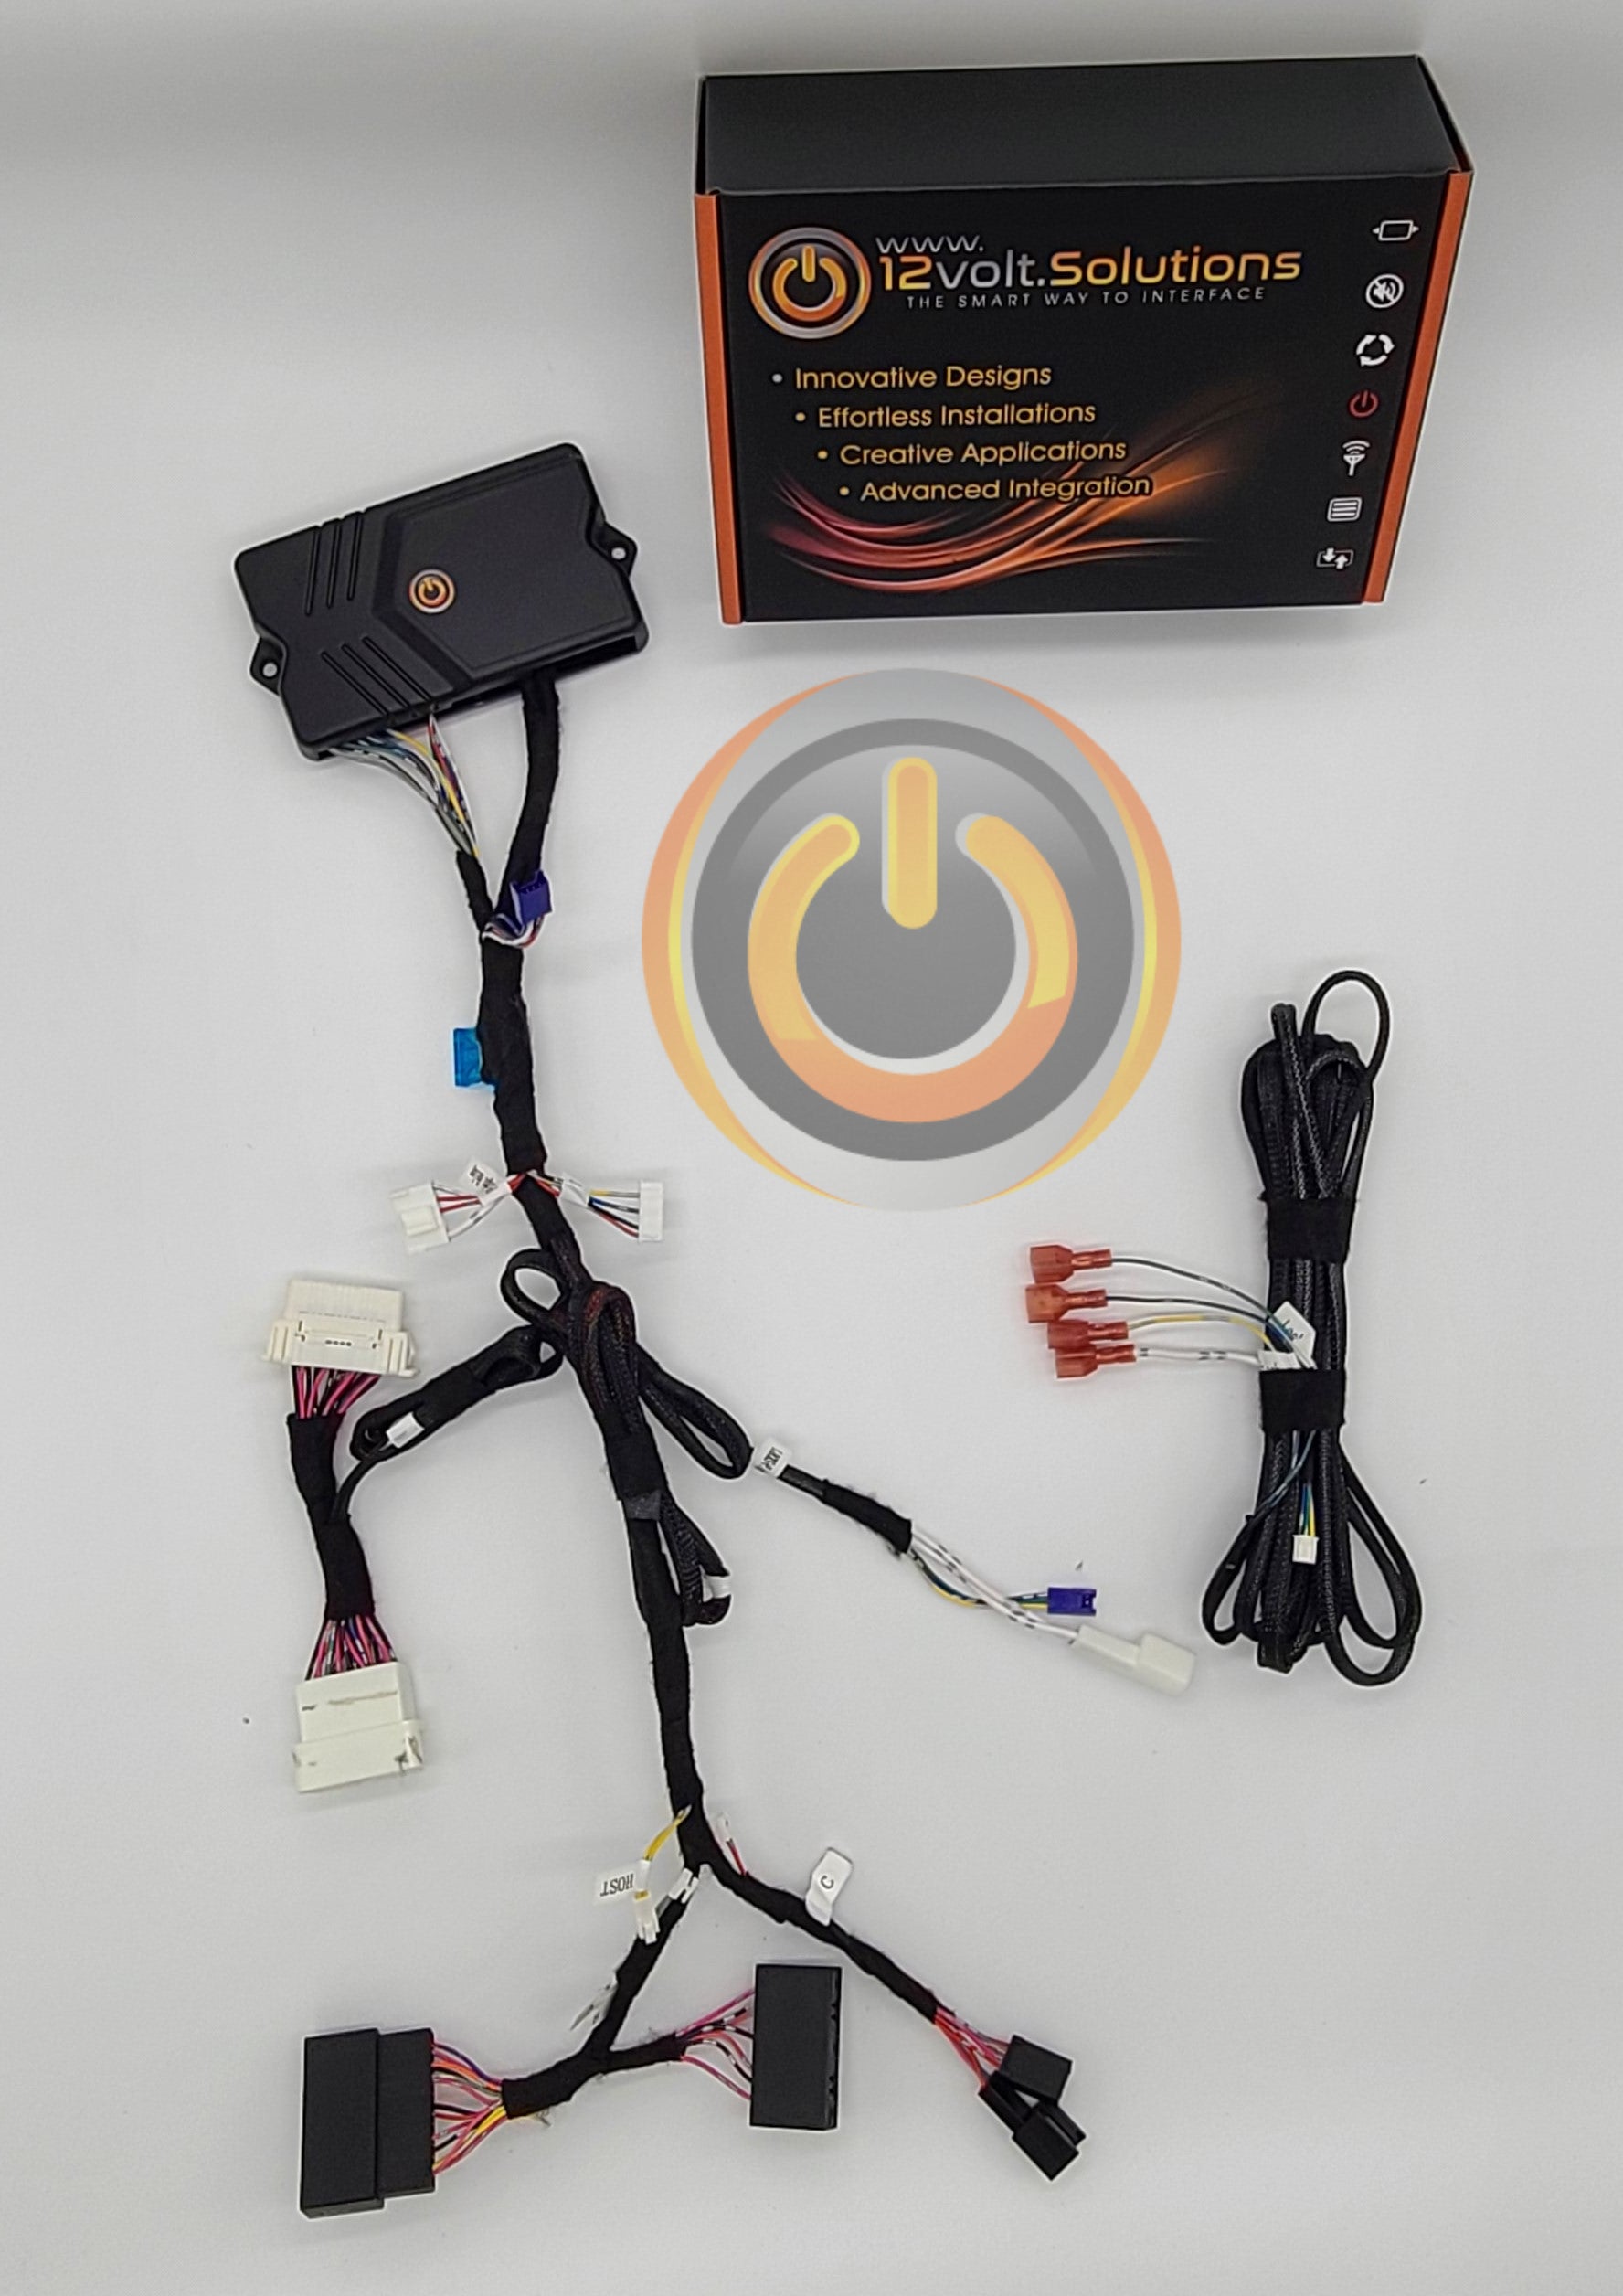 2008-2011 Mazda Tribute Remote Start Plug and Play Kit-12Volt.Solutions